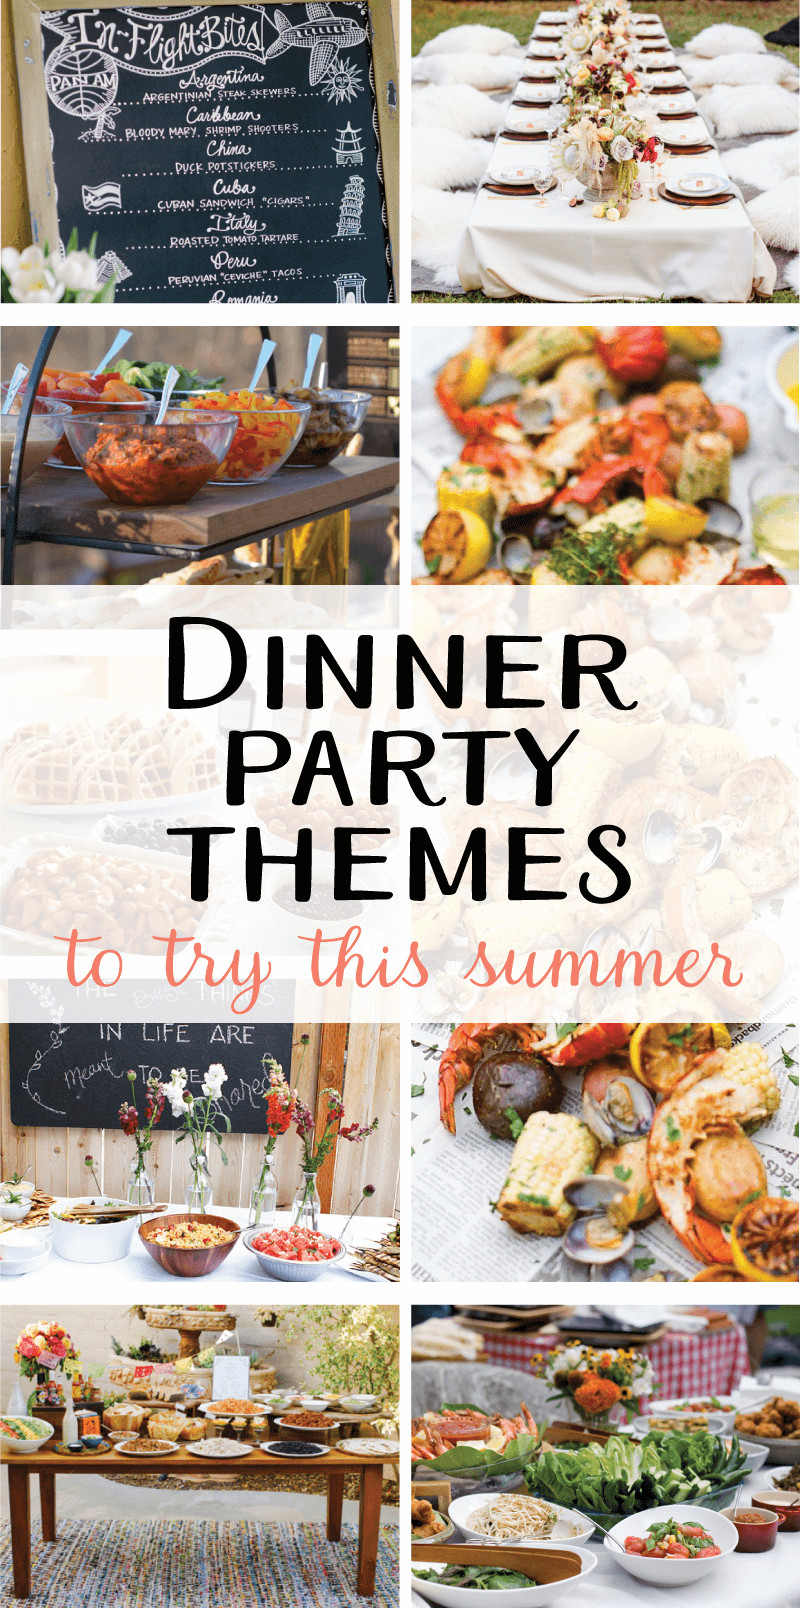 Small Dinner Party Ideas
 9 Creative Dinner Party Themes to Try this Summer on Love